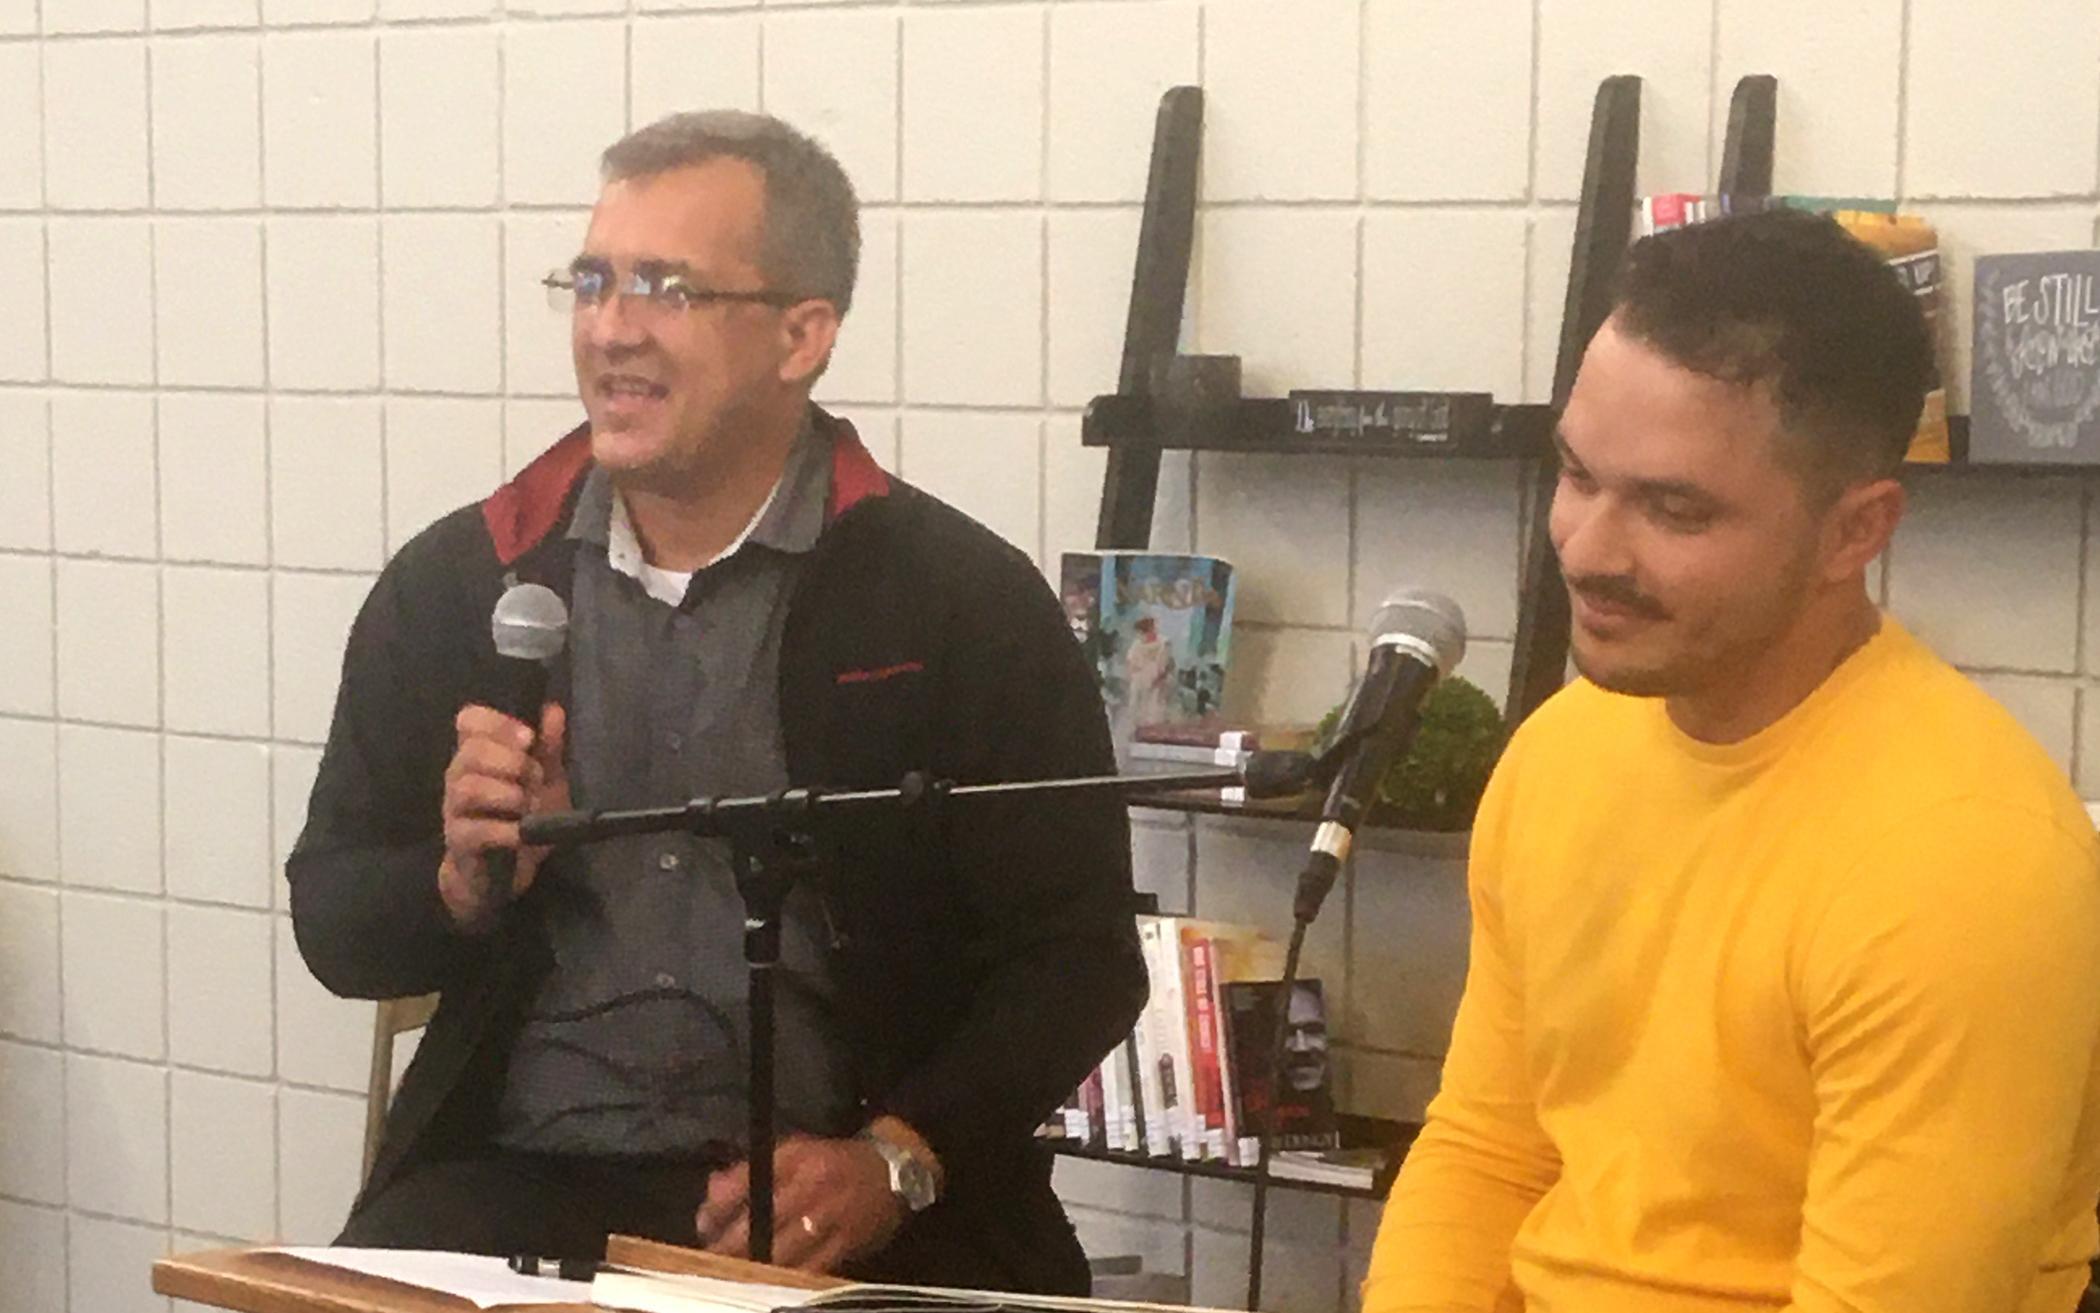 Pastor Yordanys Diaz (left) speaks at Hillside CRC in Kentwood, Mich., about leading the Christian Reformed Church in Cuba. Jonathan Gonzalez translated for the English audience.